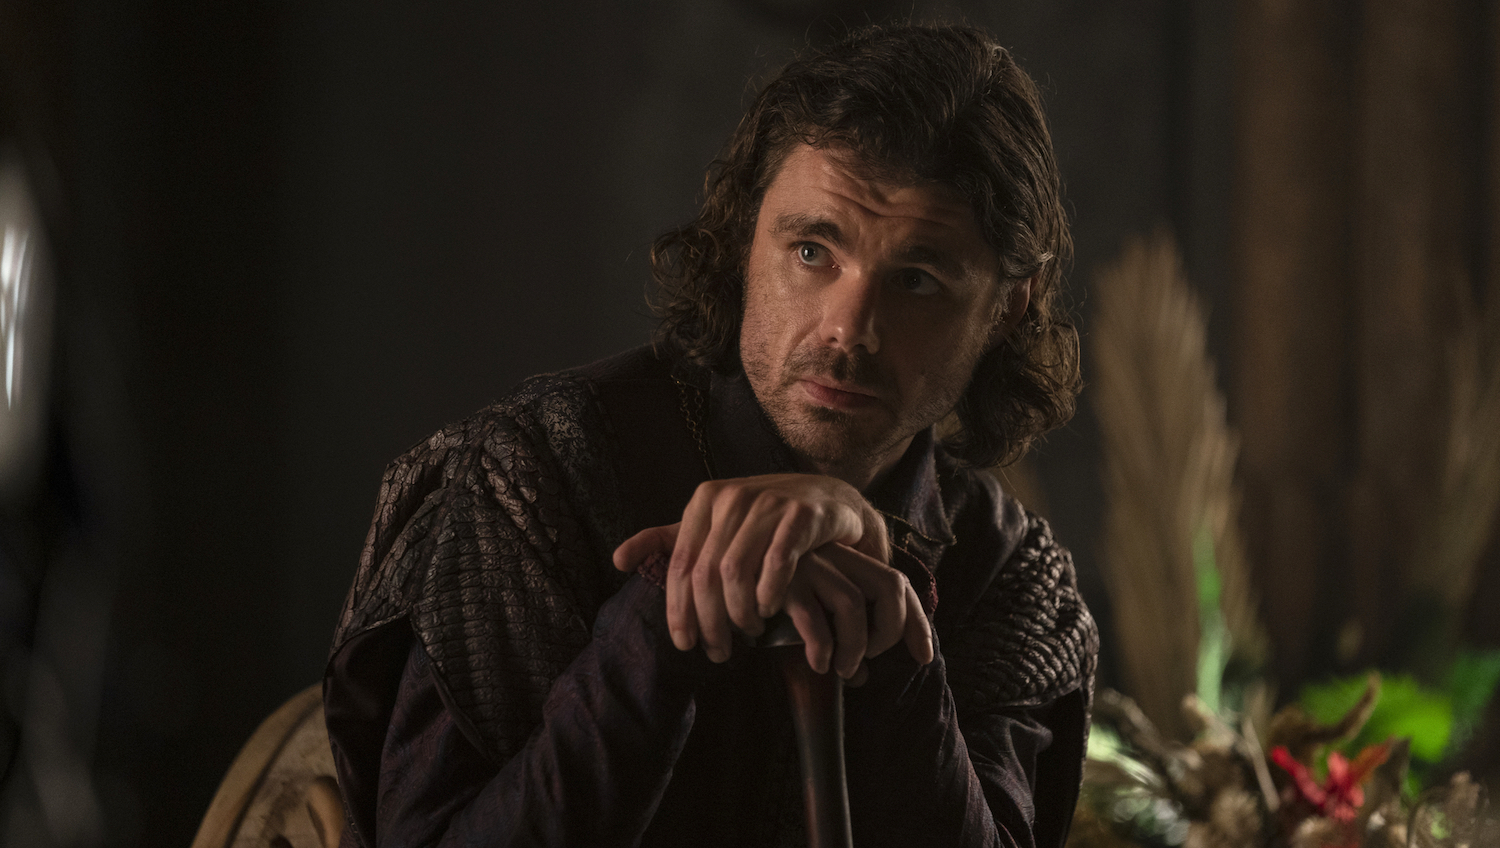 House of the Dragon: Larys Strong Is the Tyrion Lannister of His Day